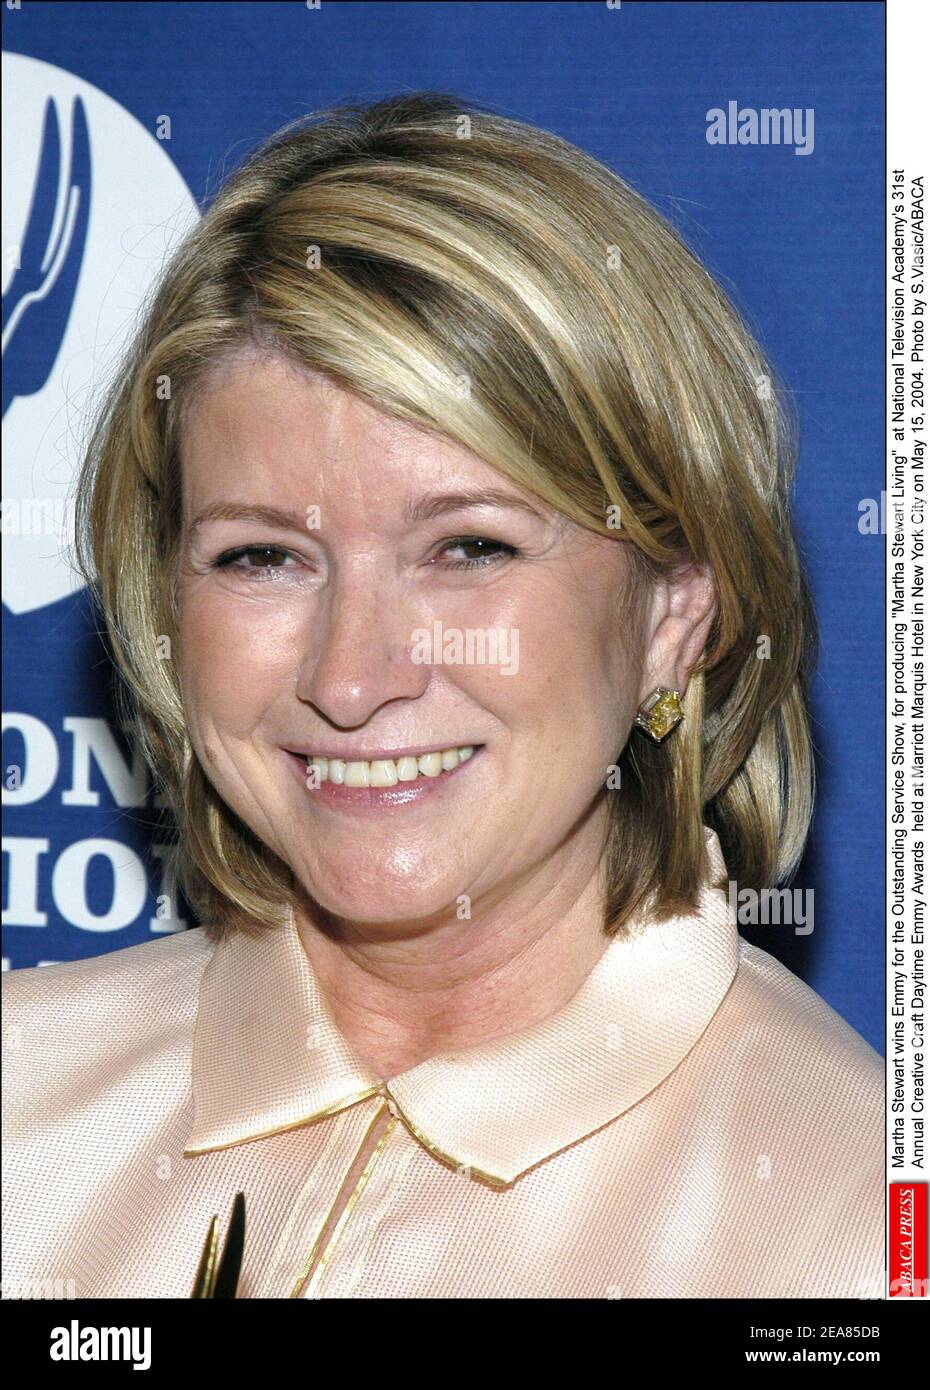 New York, NY. May 15, 2004 Martha Stewart wins Emmy for the Outstanding Service Show, for producing Martha Stewart Living at National Television Academy's 31st Annual Creative Craft Daytime Emmy Awards held at Marriott Marquis Hotel in New York City on May 15, 2004. Photo by S.Vlasic/ABACA Stock Photo